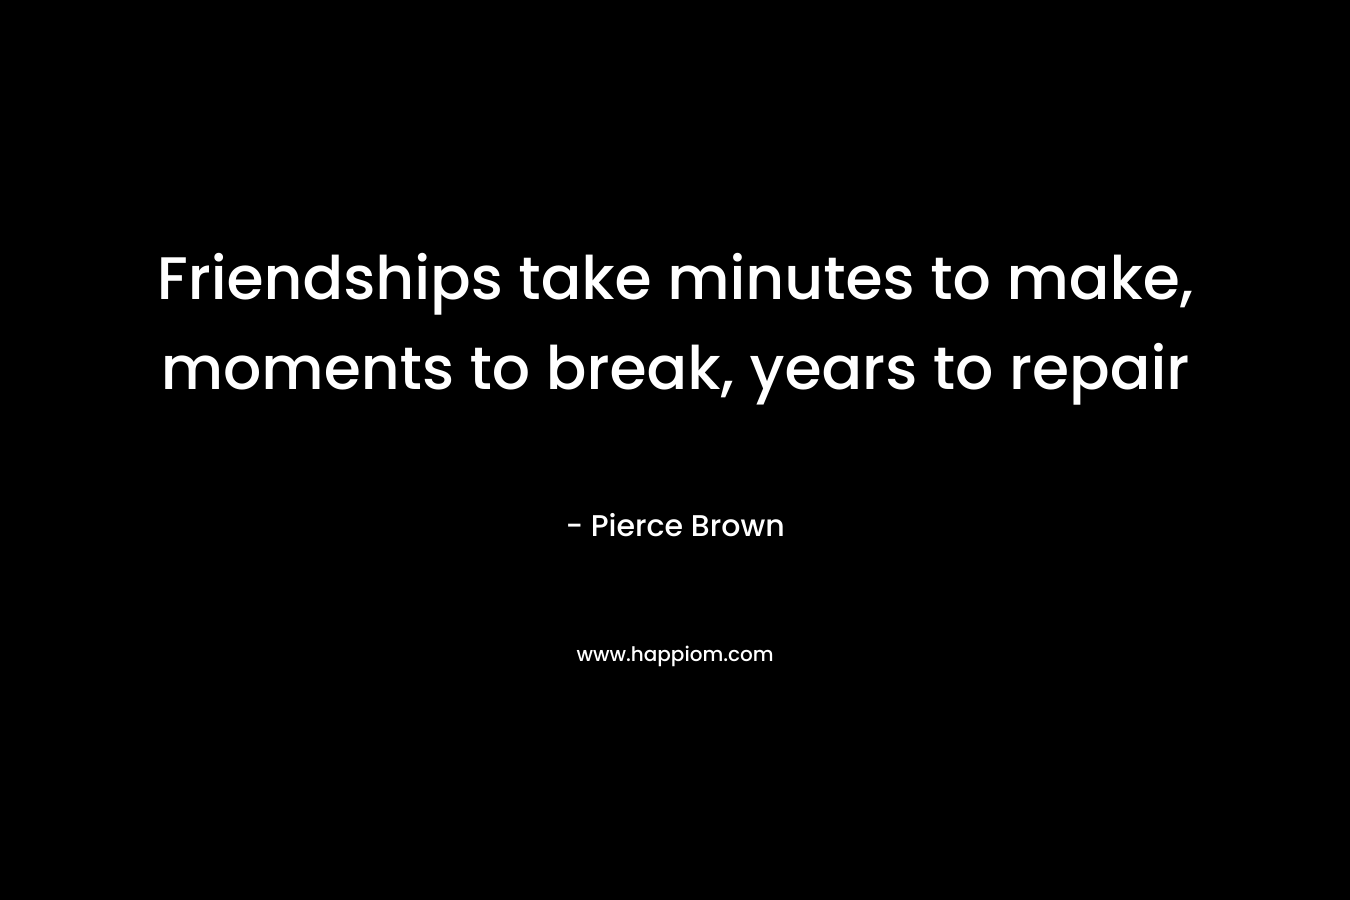 Friendships take minutes to make, moments to break, years to repair